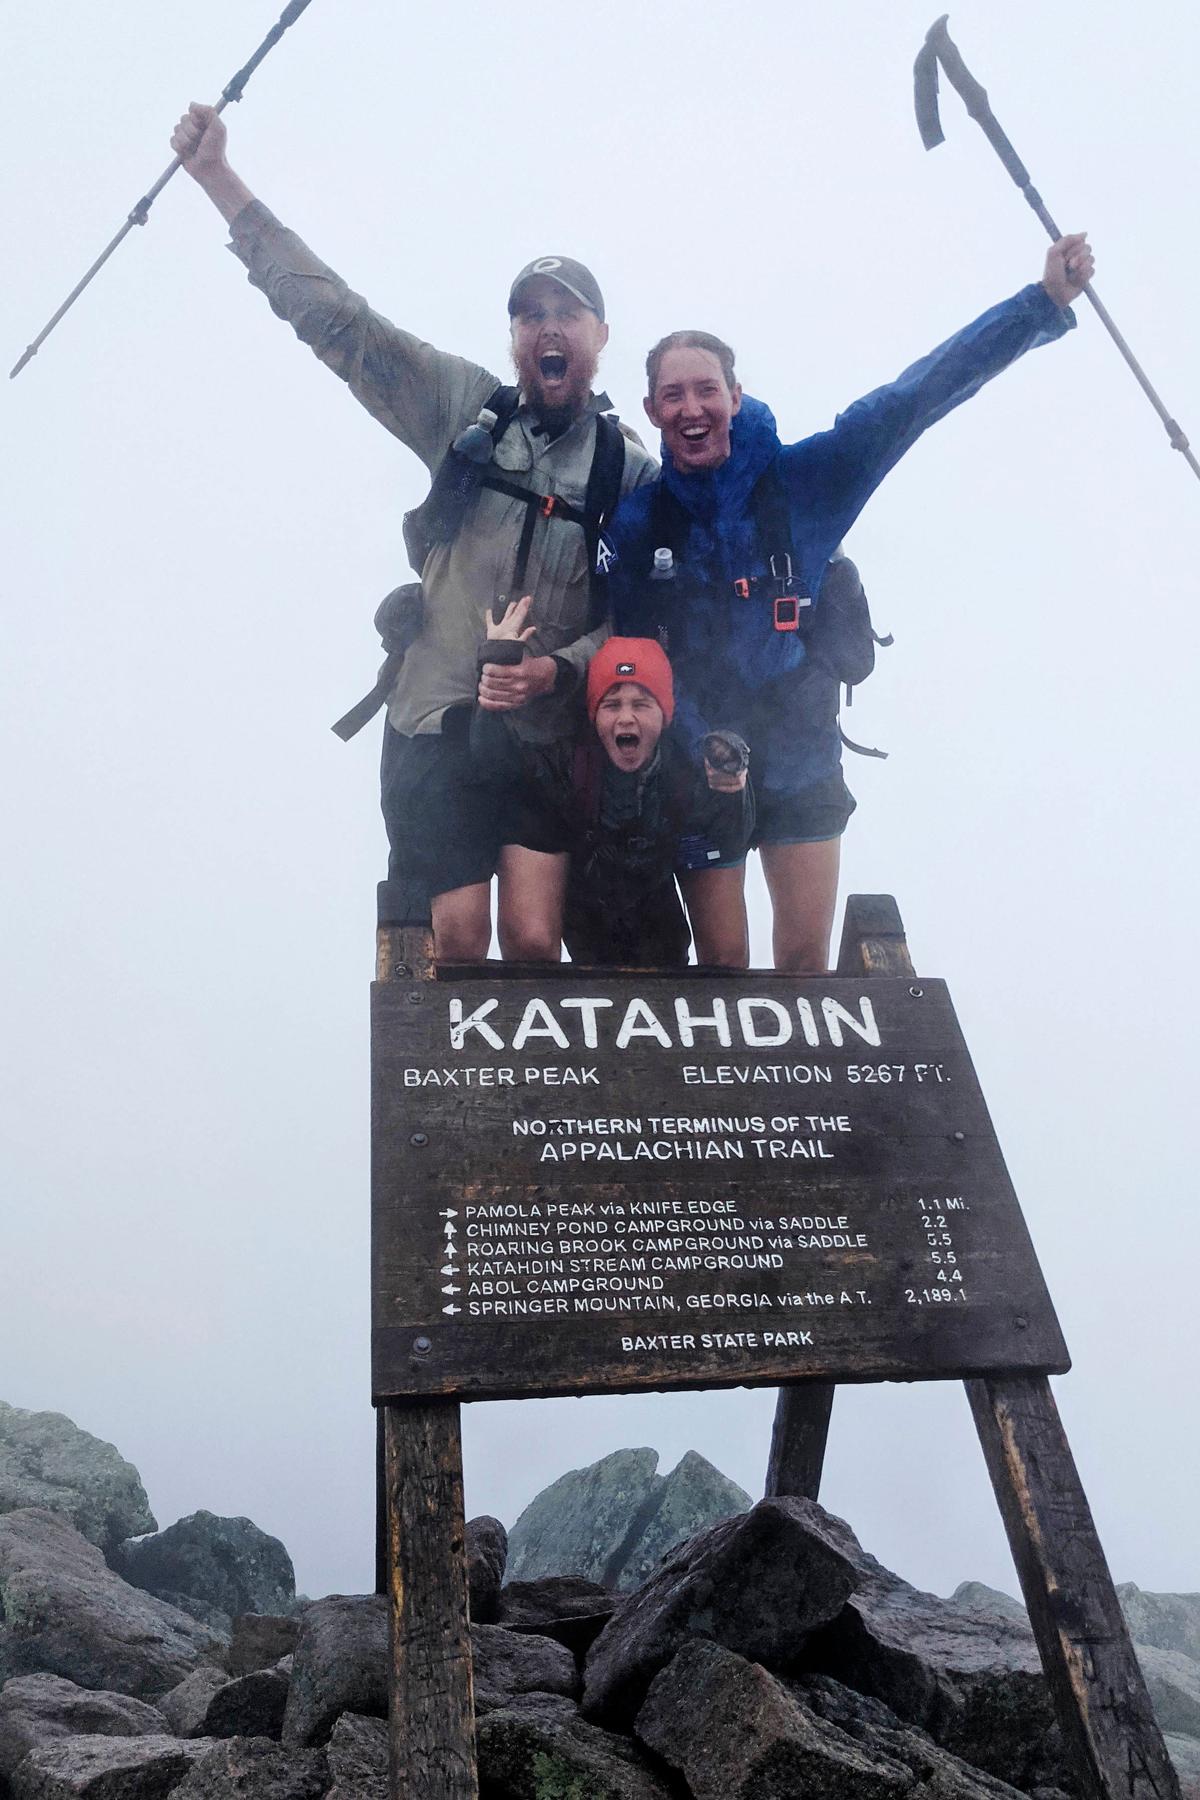 Harvey Sutton (C) poses with his mom, Cassie (R), and dad, Joshua, at the summit of Mount Katahdin, Maine, on Aug. 9, 2021, while hiking the Appalachian Trail with his mom and dad. (Joshua Sutton/AP Photo)